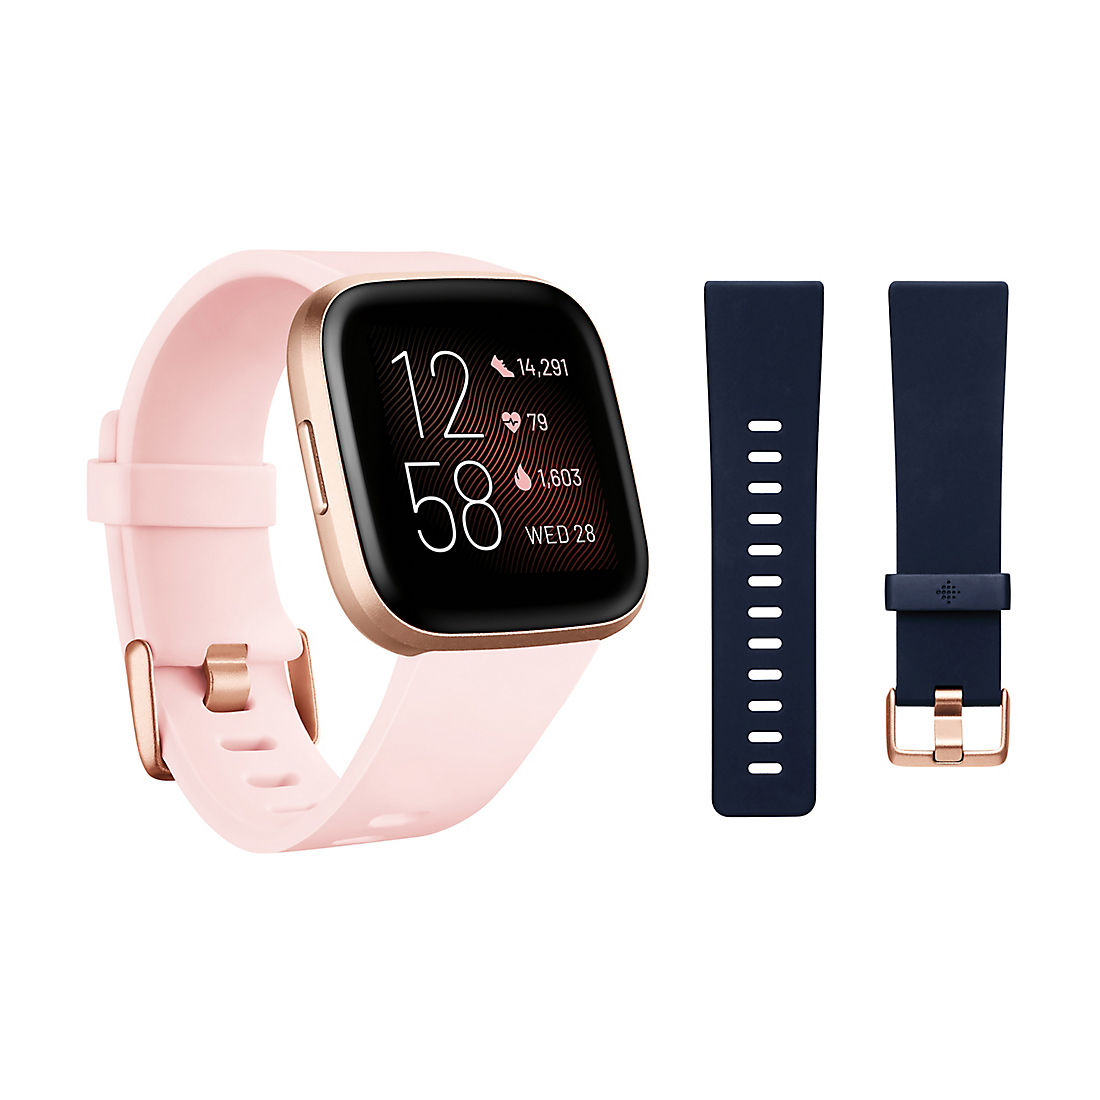 Fitbit Versa 2 Smartwatch Bundle with Small and Large Bands - Petal